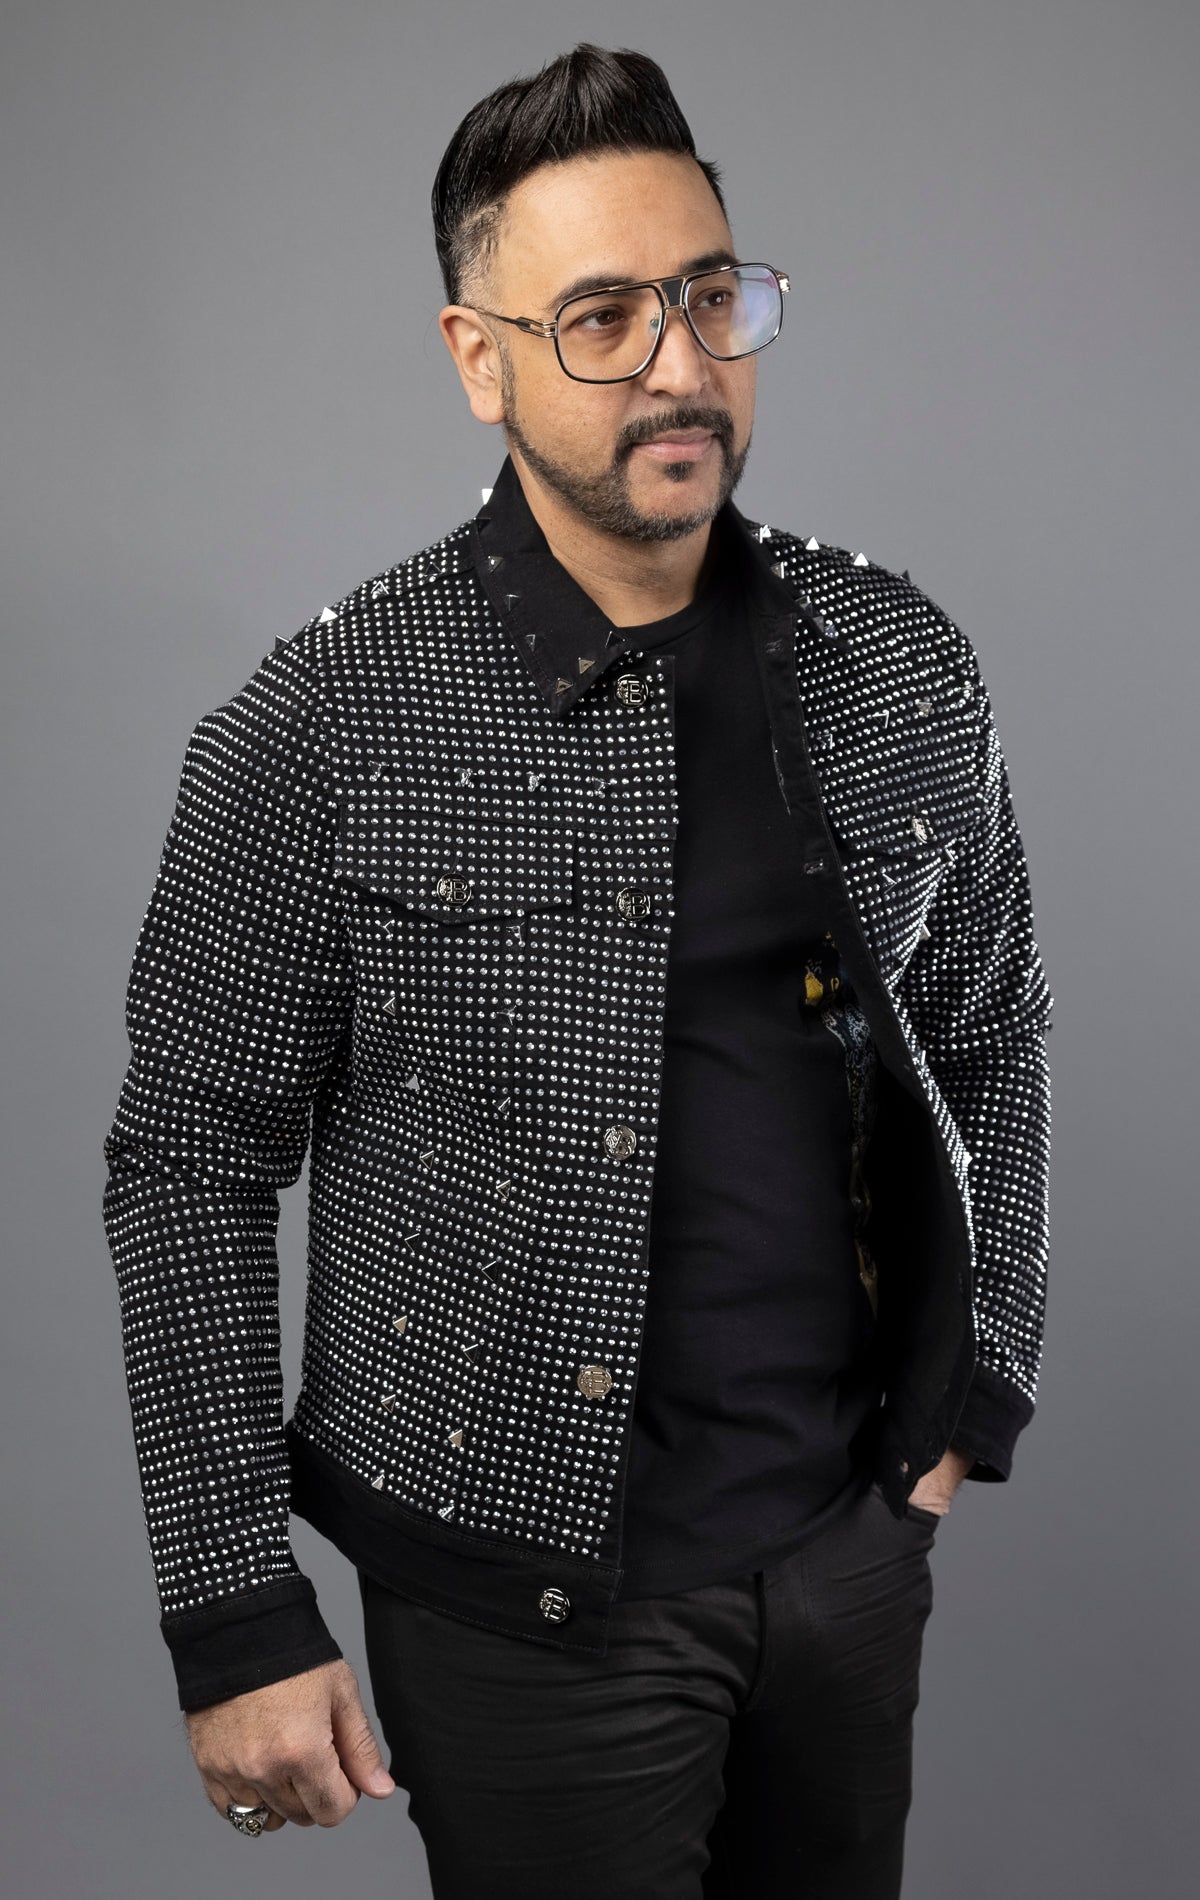 Black stylish jean jacket adorned with crystals and spikes for men.